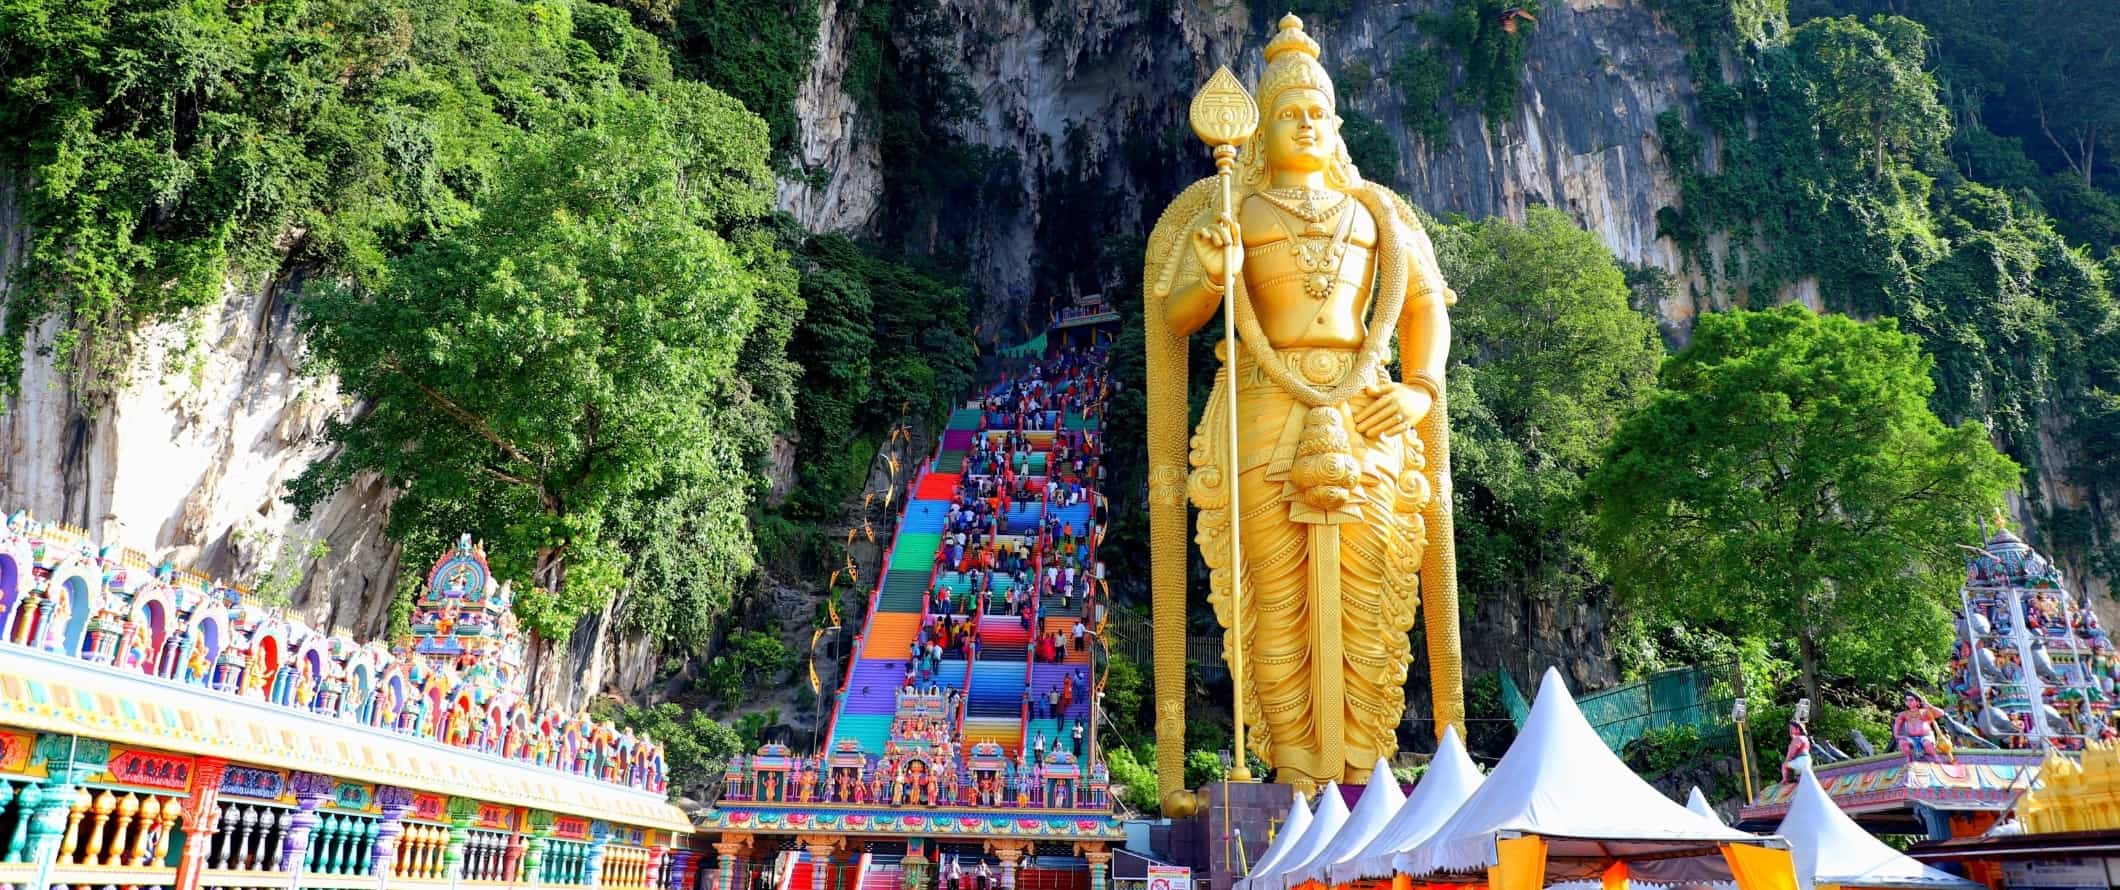 The entrance to the Batu caves with colorful steps and a huge golden statue of Arulmigu Murugan, a Hindu deity in Malaysia